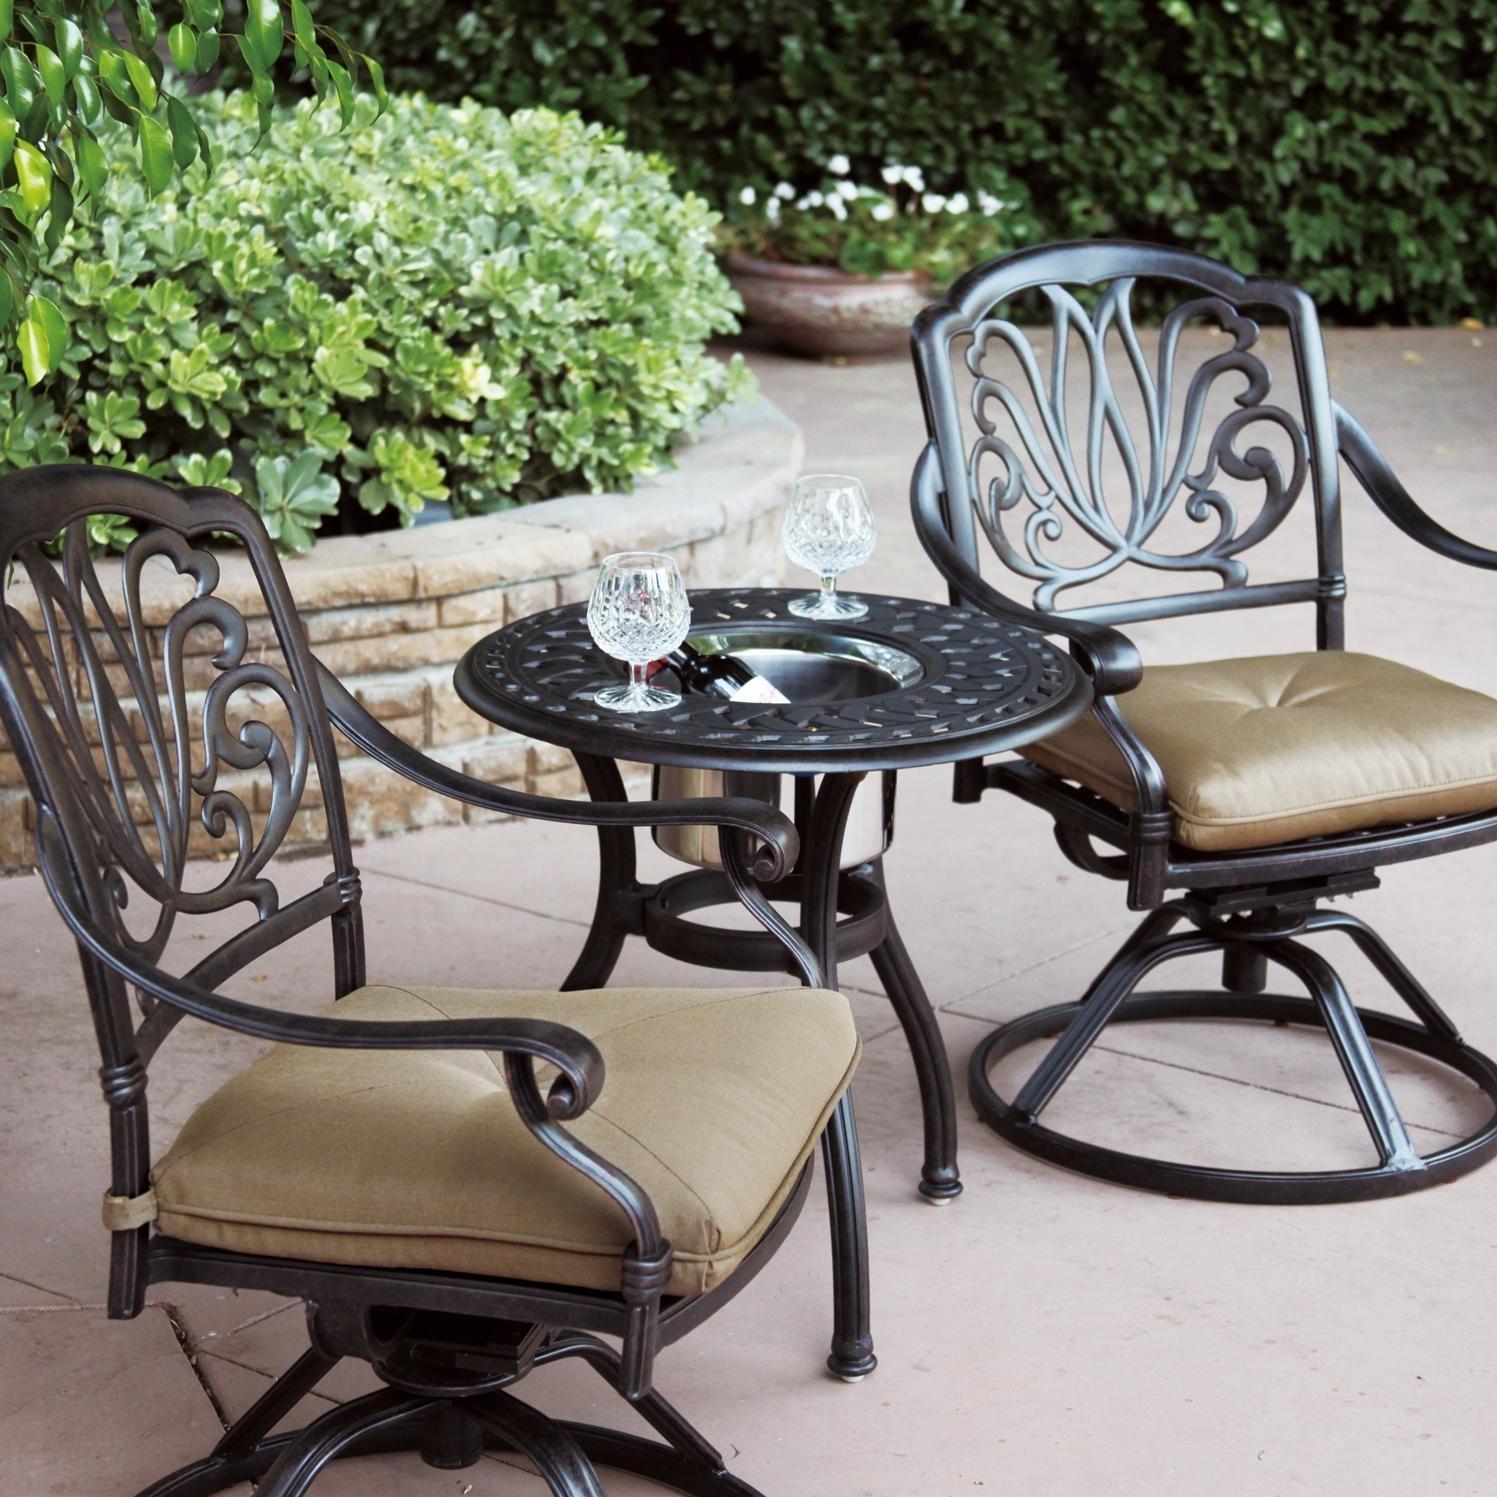 Darlee Elisabeth 3 Piece Cast Aluminum Patio Bistro Set With Swivel Rocker  Chairs - End Table With Ice Bucket Insert : BBQ Guys